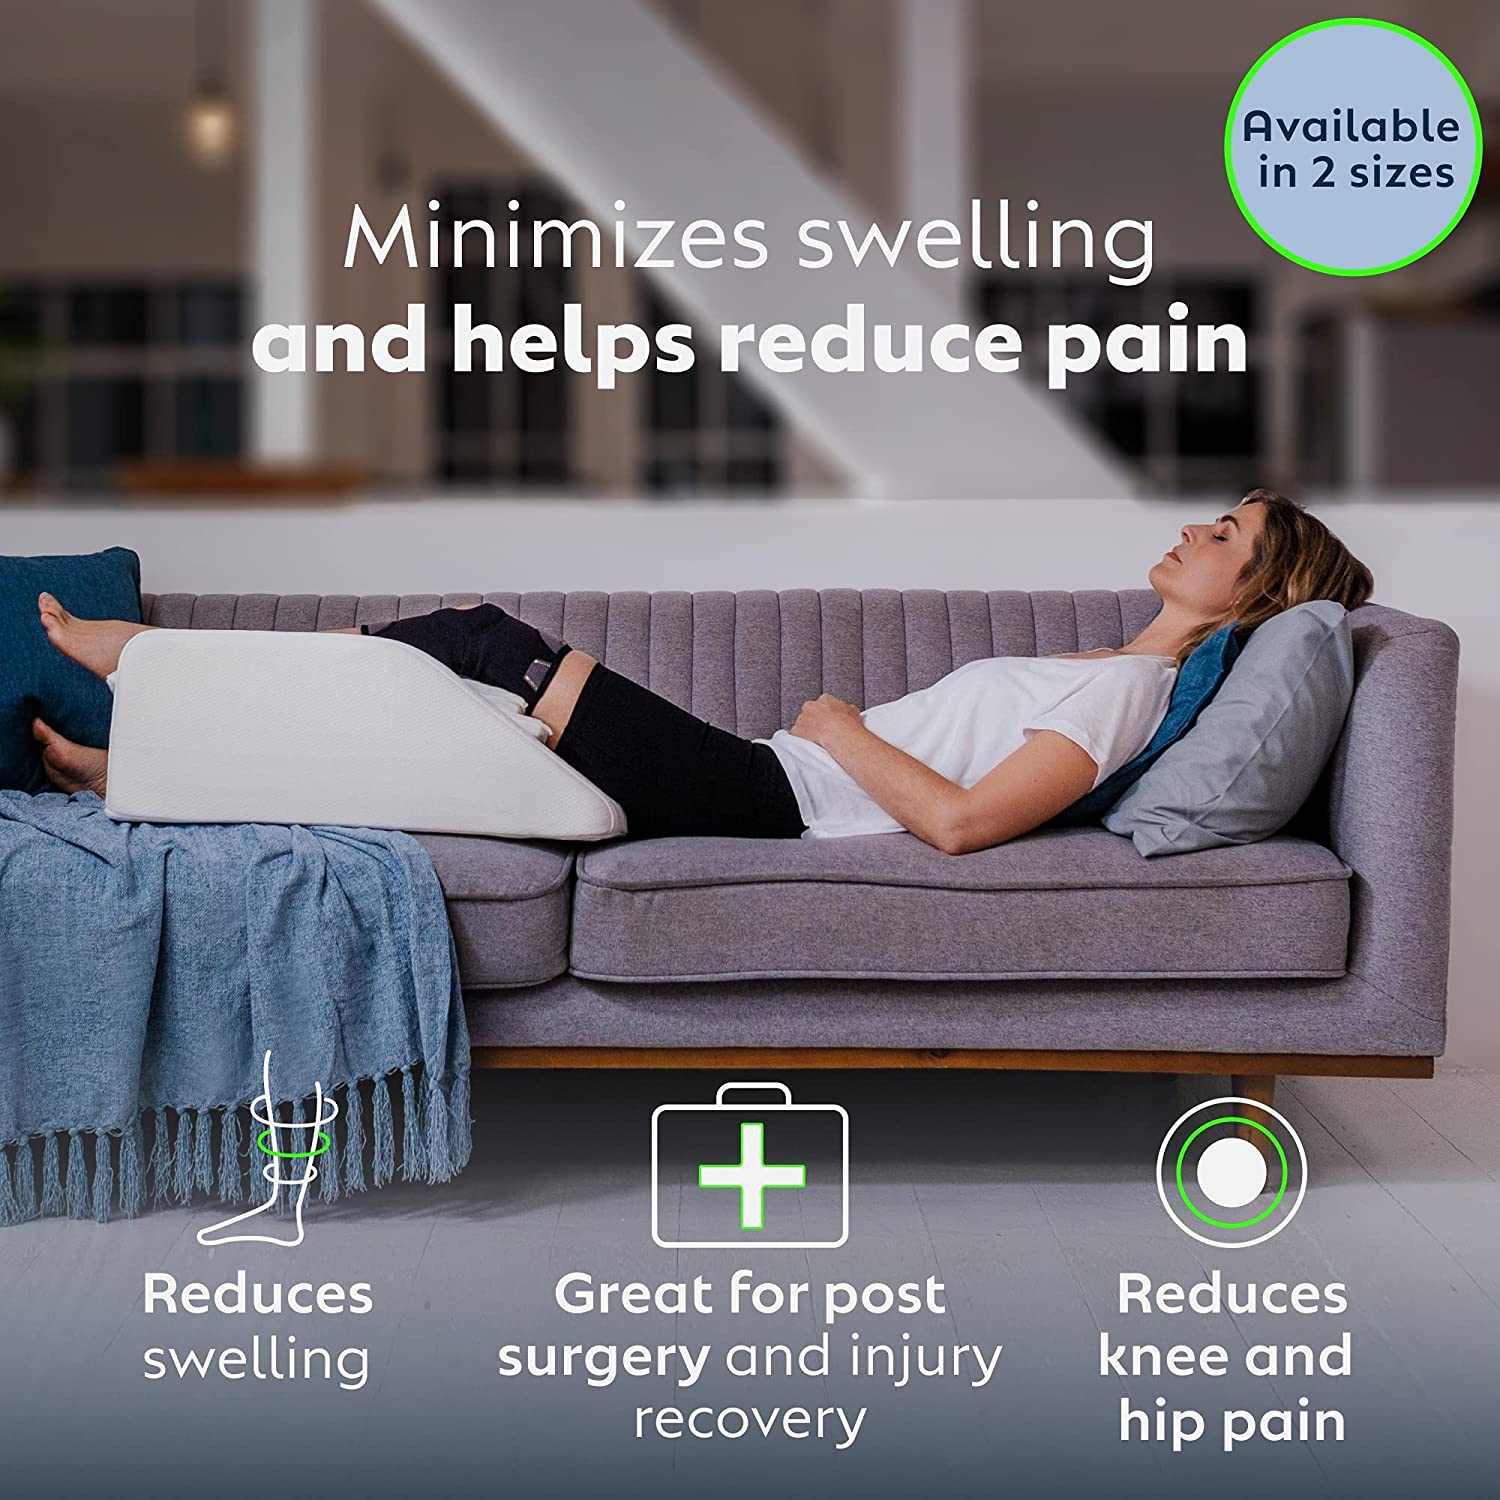 Adjustable Leg Elevation Pillows for Swelling after Surgery